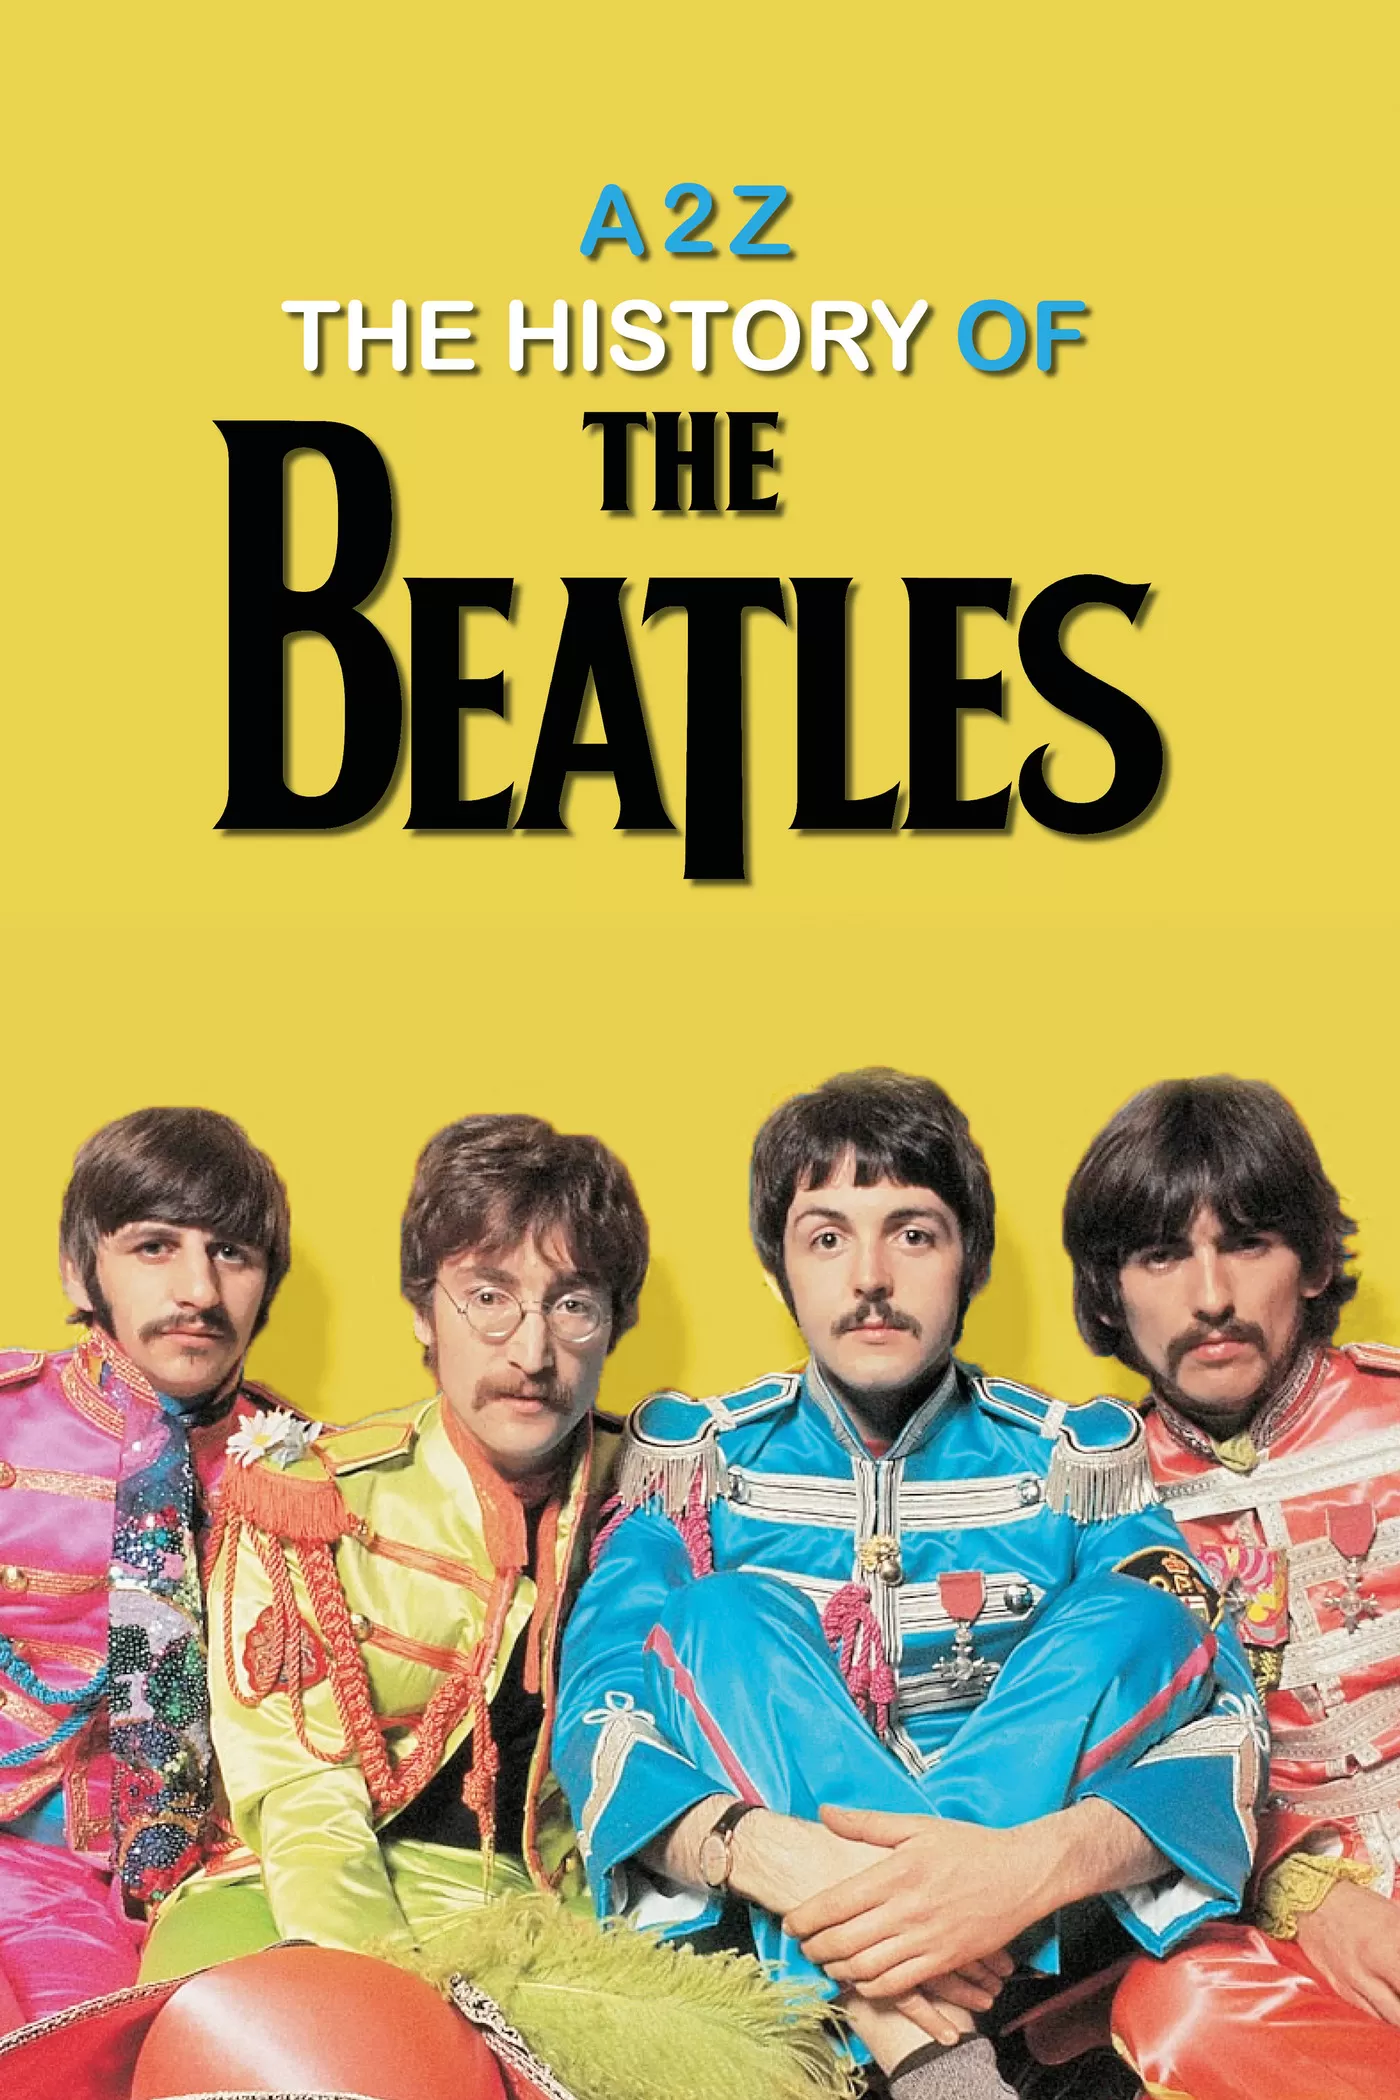 A2Z The History of the Beatles